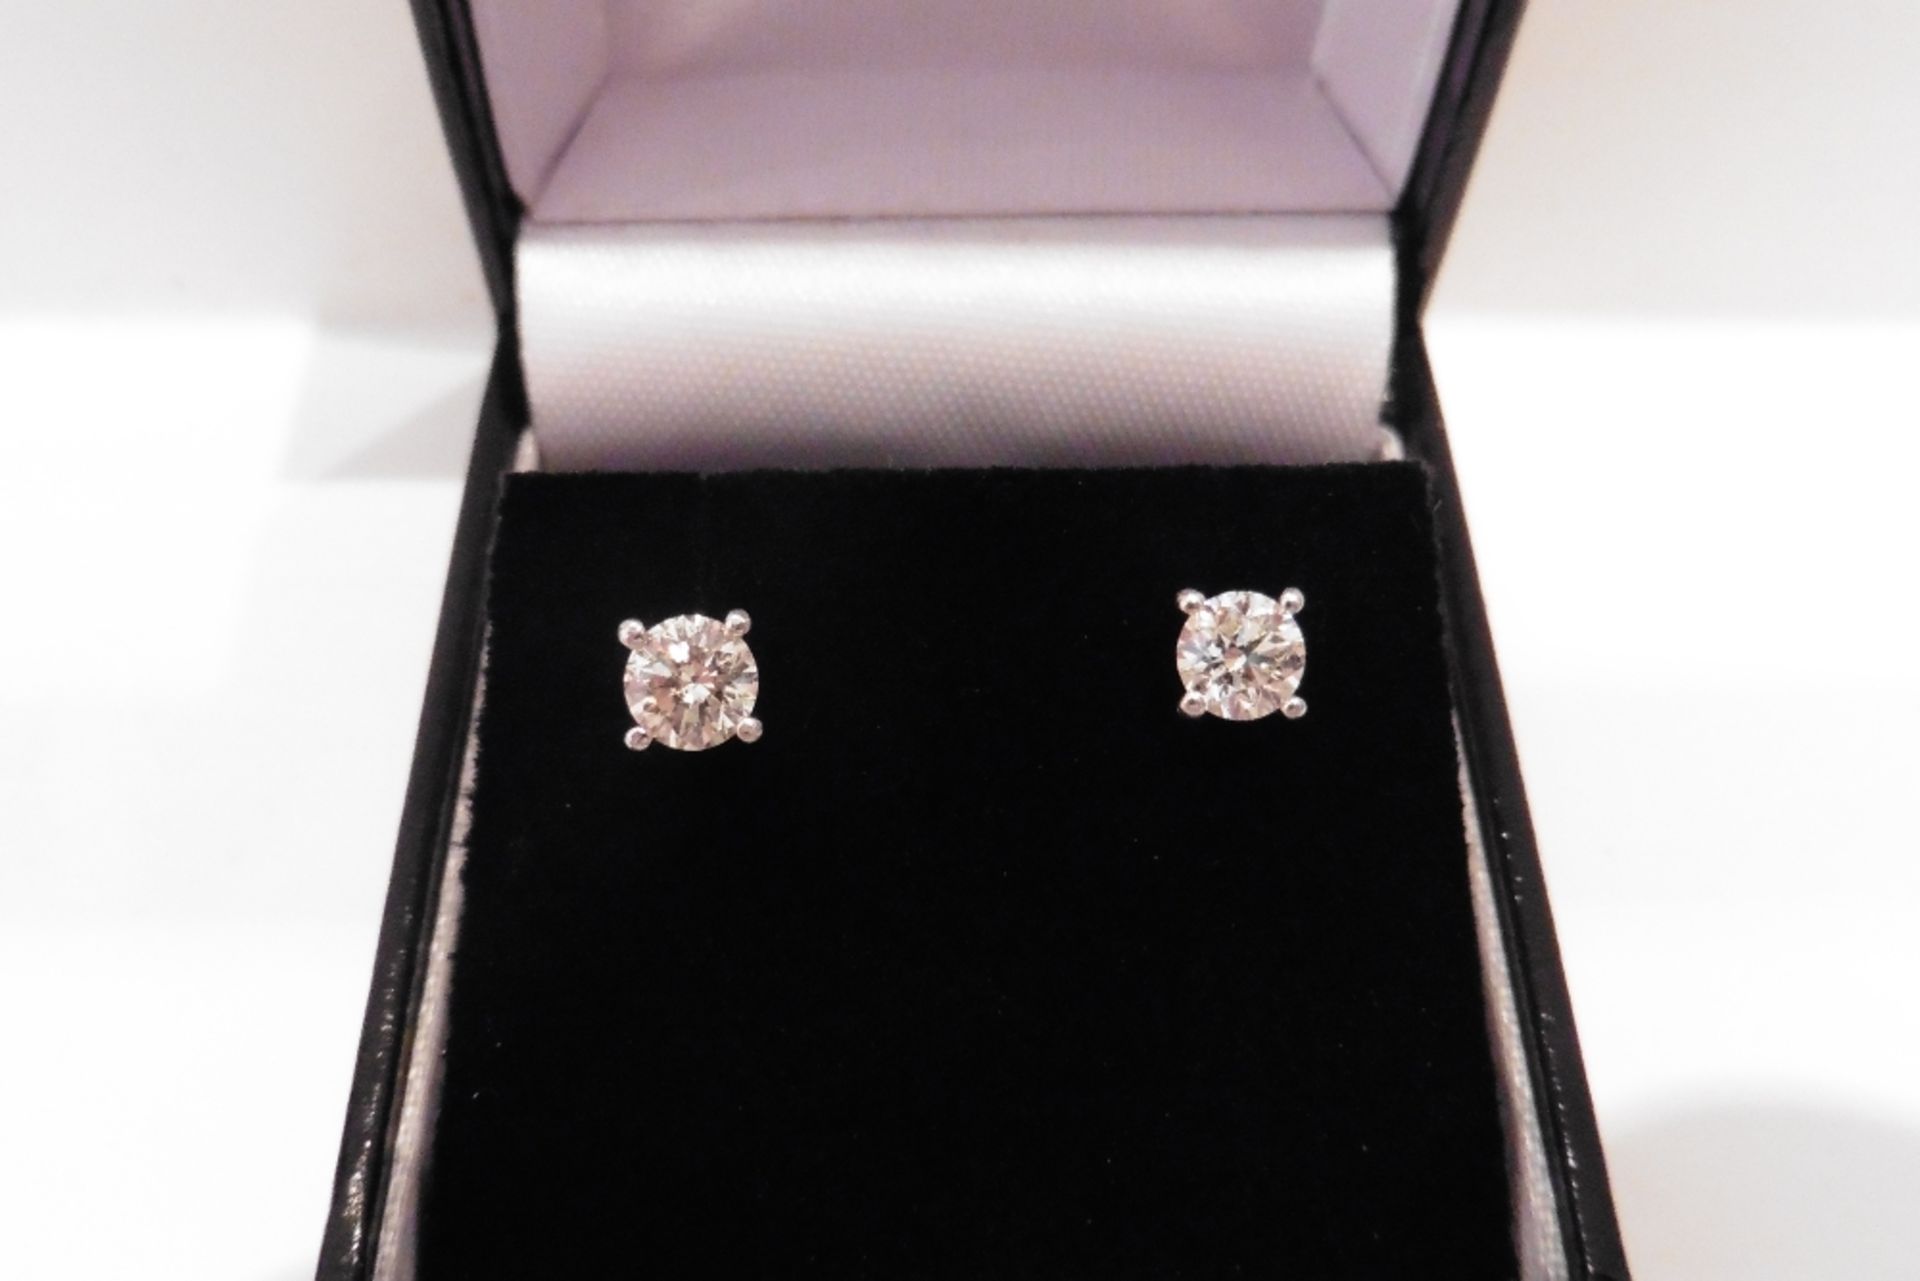 Pair of solitaire stud earrings each set with a russian cut diamond weighing a total of 0.18ct. Grad